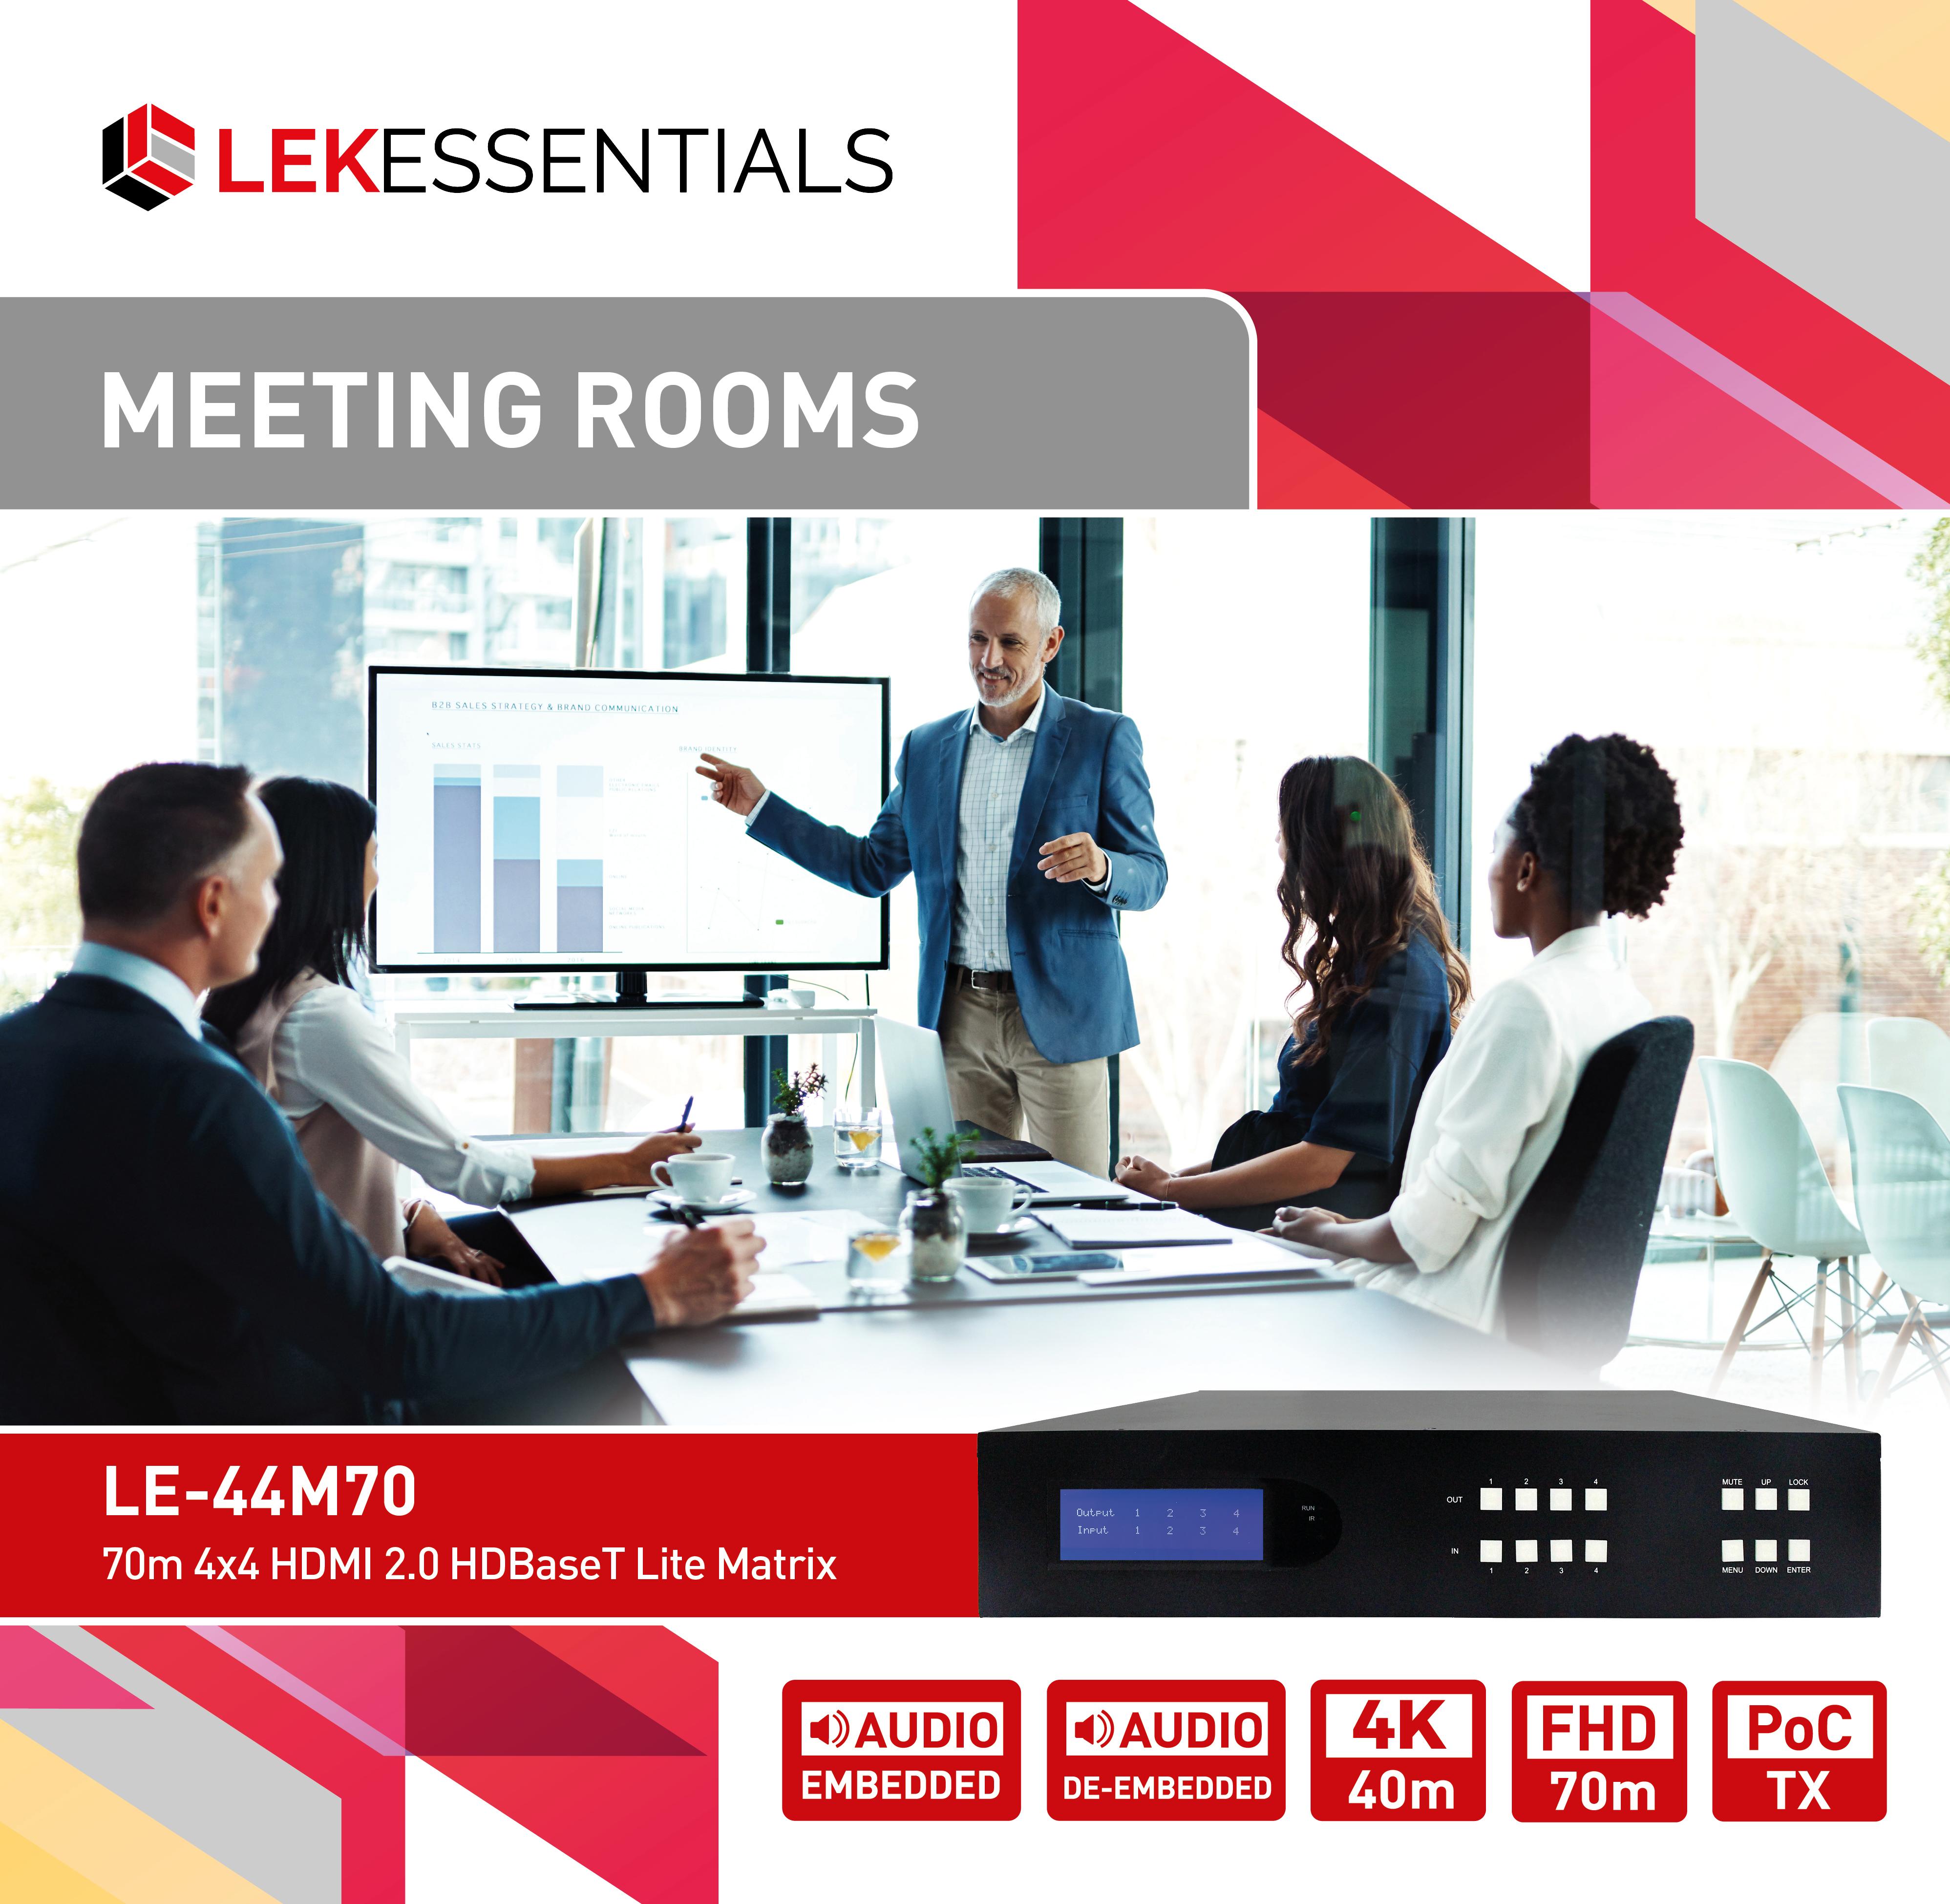 LE-44M70 Meeting Rooms